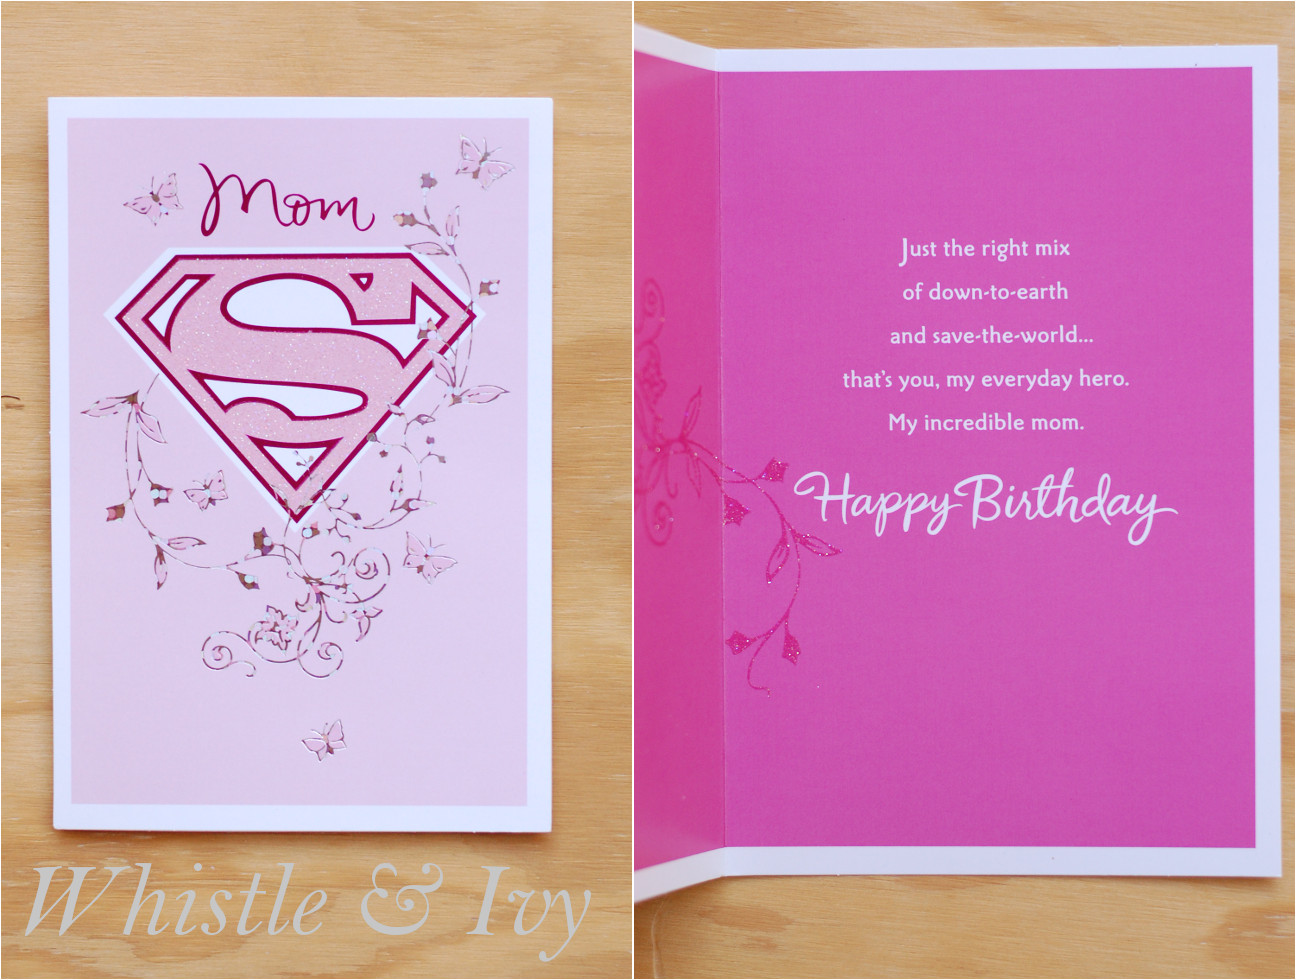 Happy Birthday Mom Card Ideas Mothers Birthday Cards with Images Funny Mom Birthday